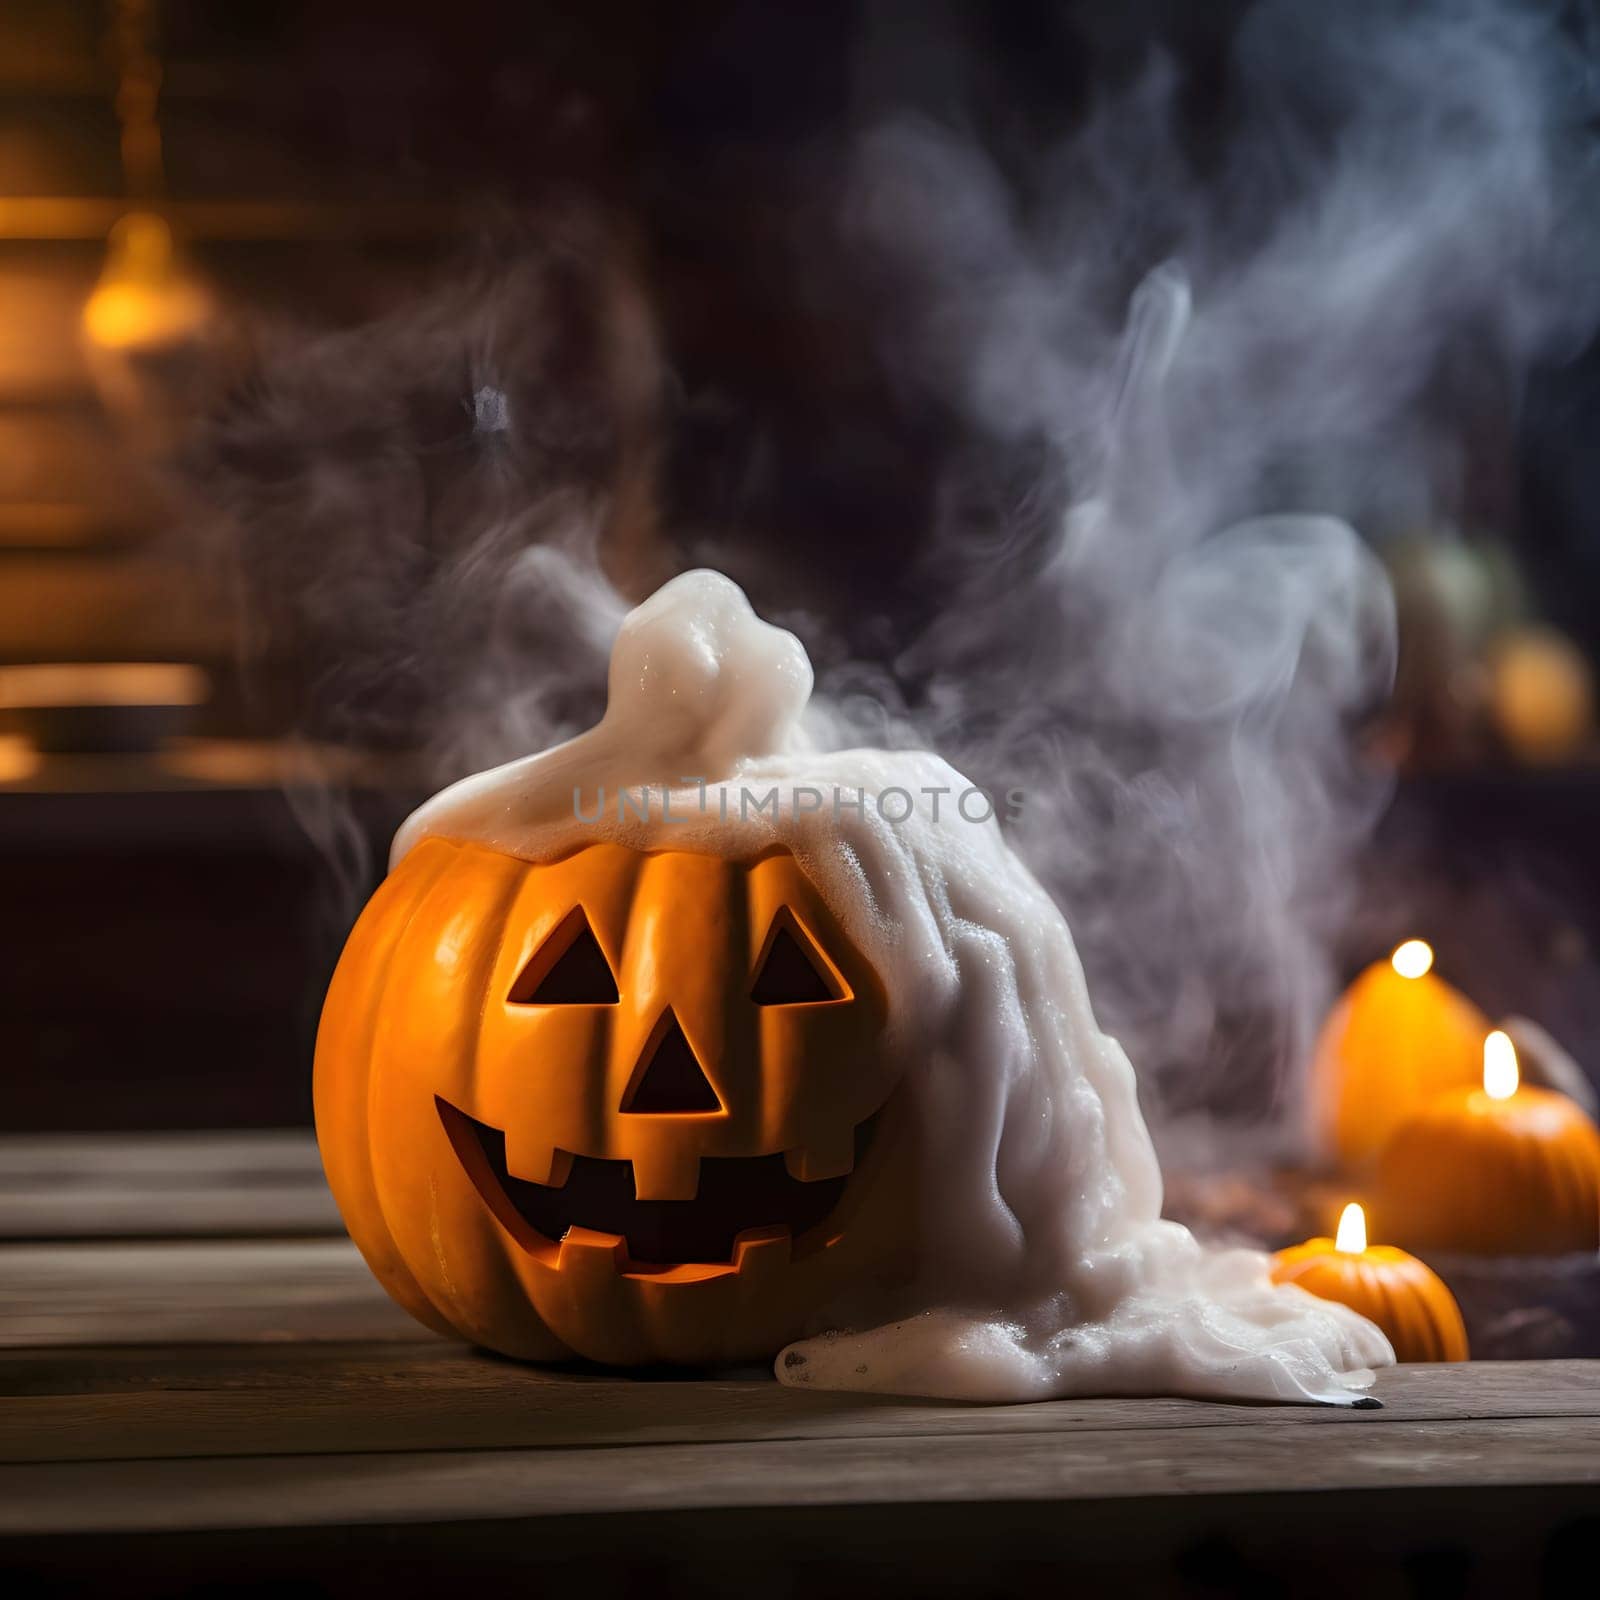 Dark pumpkin with foam in the background glowing candles and rising smoke, a Halloween image. Atmosphere of darkness and fear.